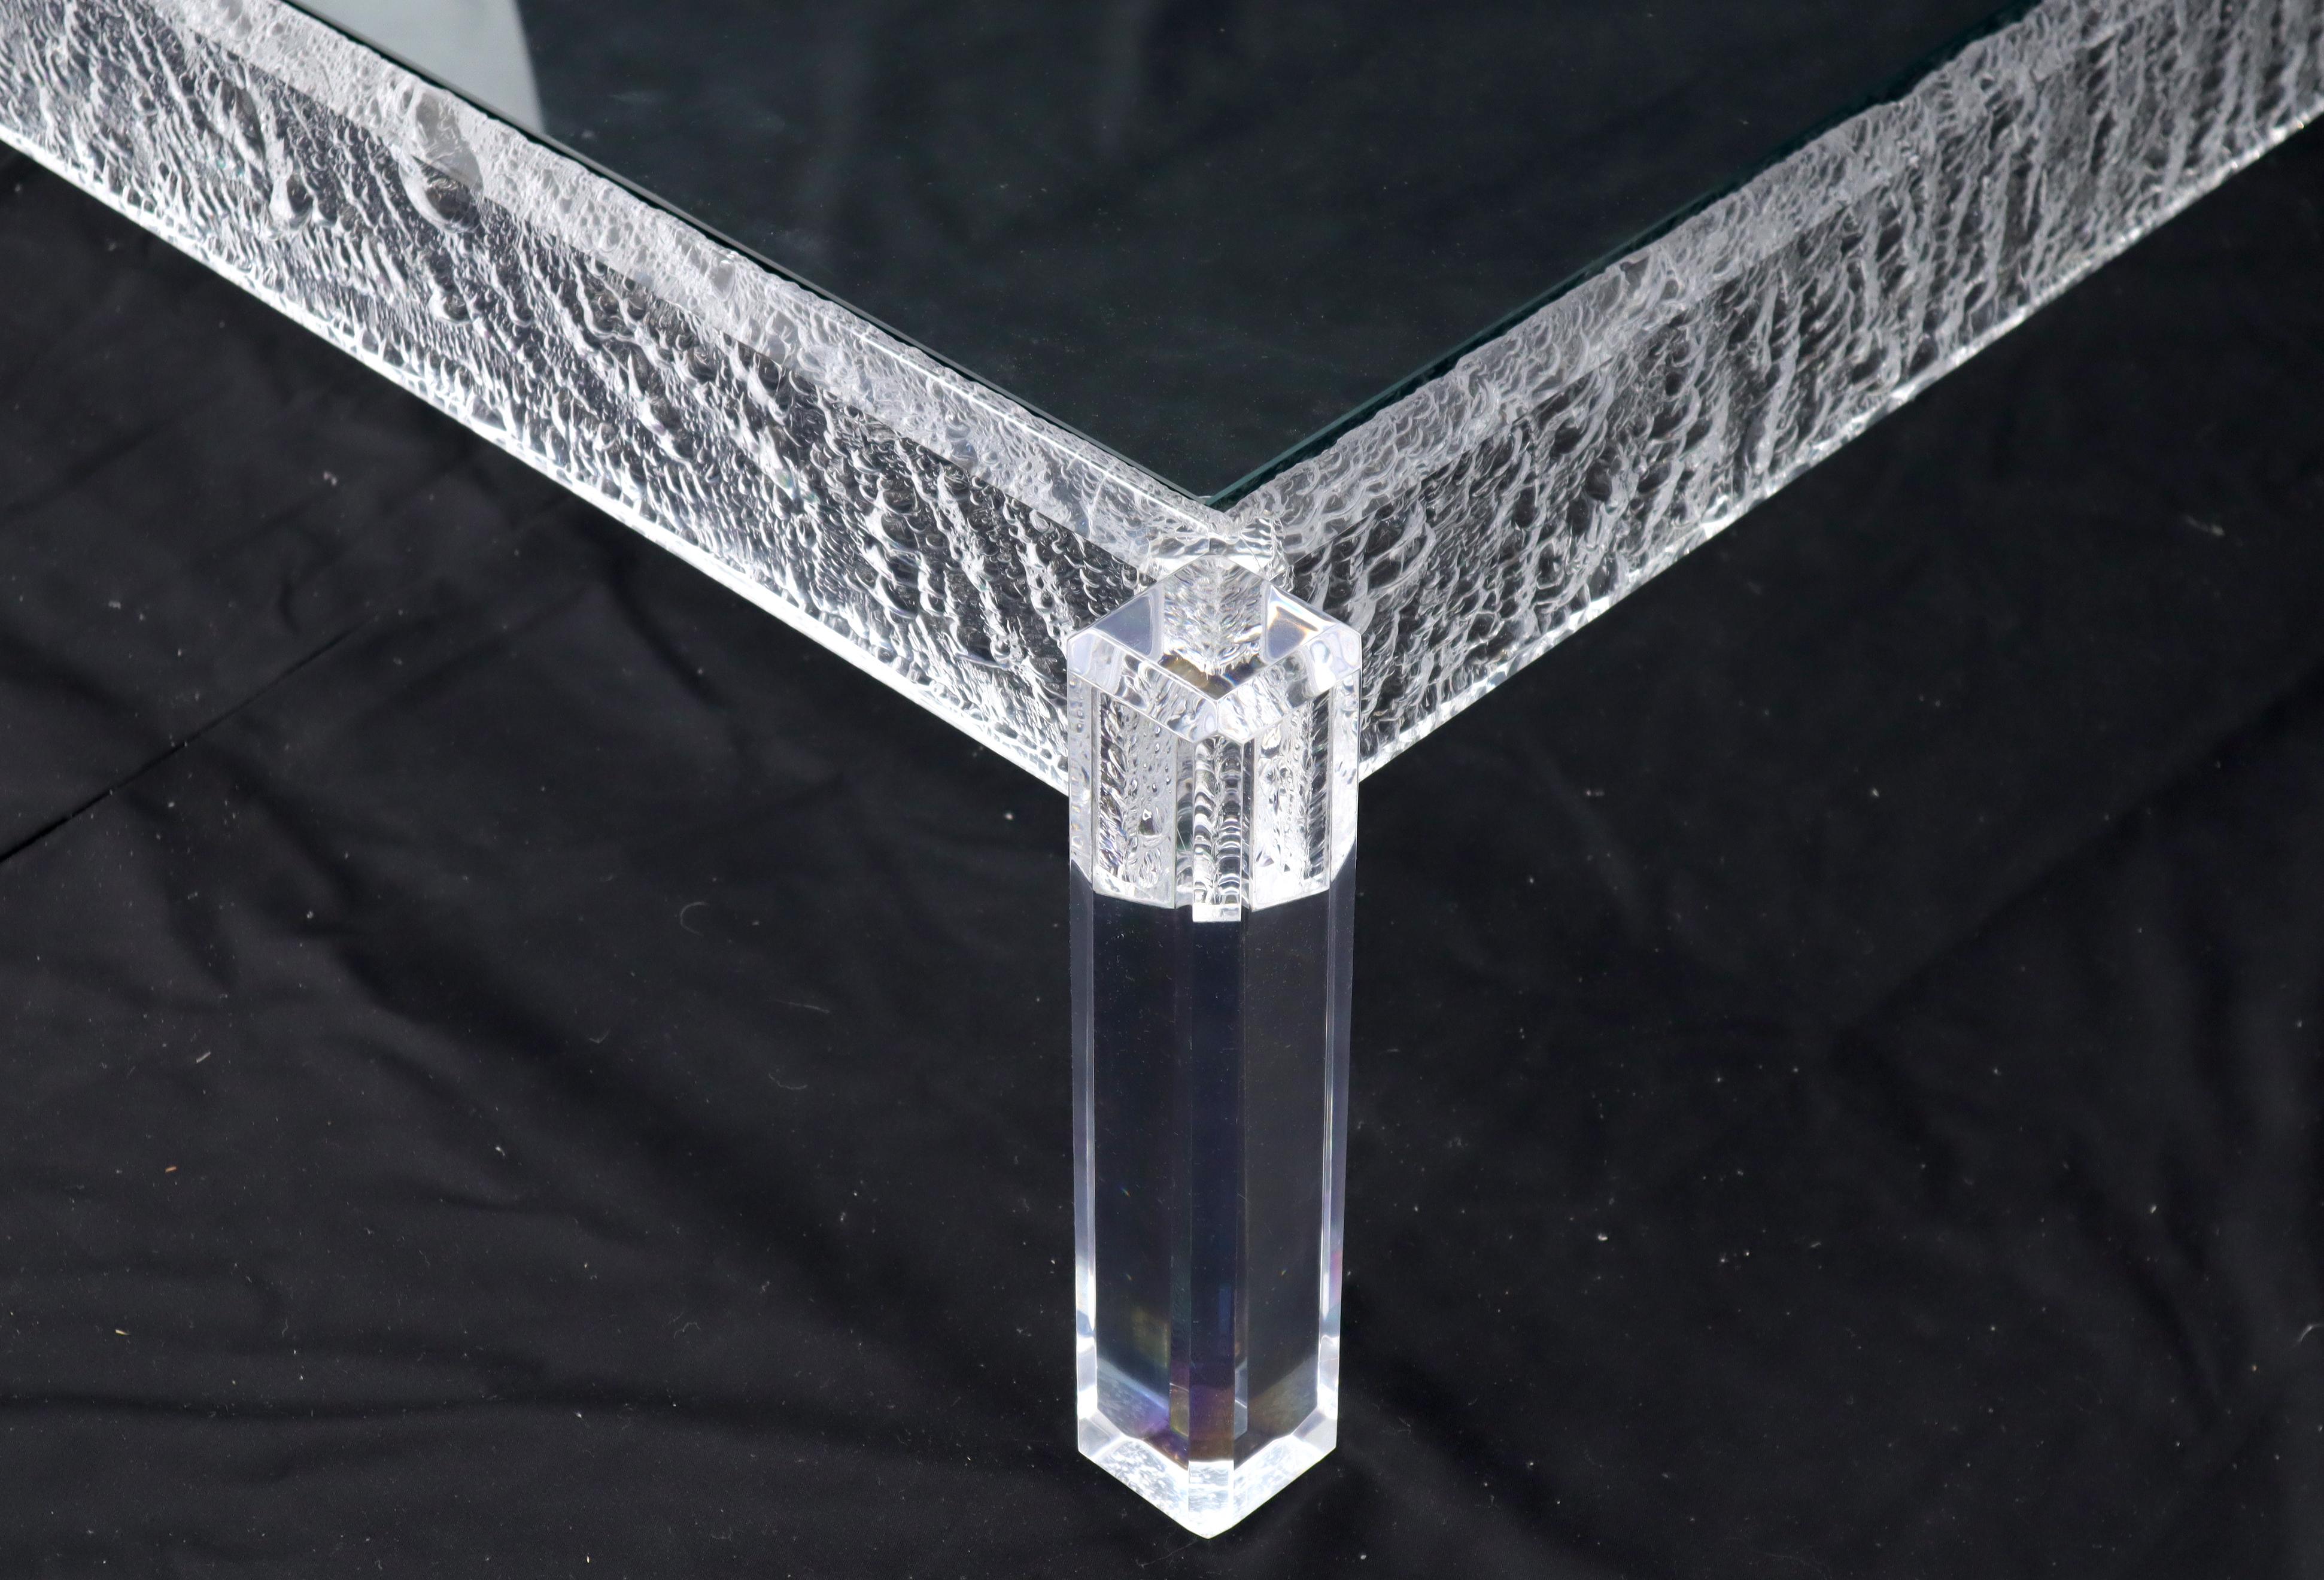 Large Square Carved Lucite Glass Top Coffee Table In Excellent Condition For Sale In Rockaway, NJ